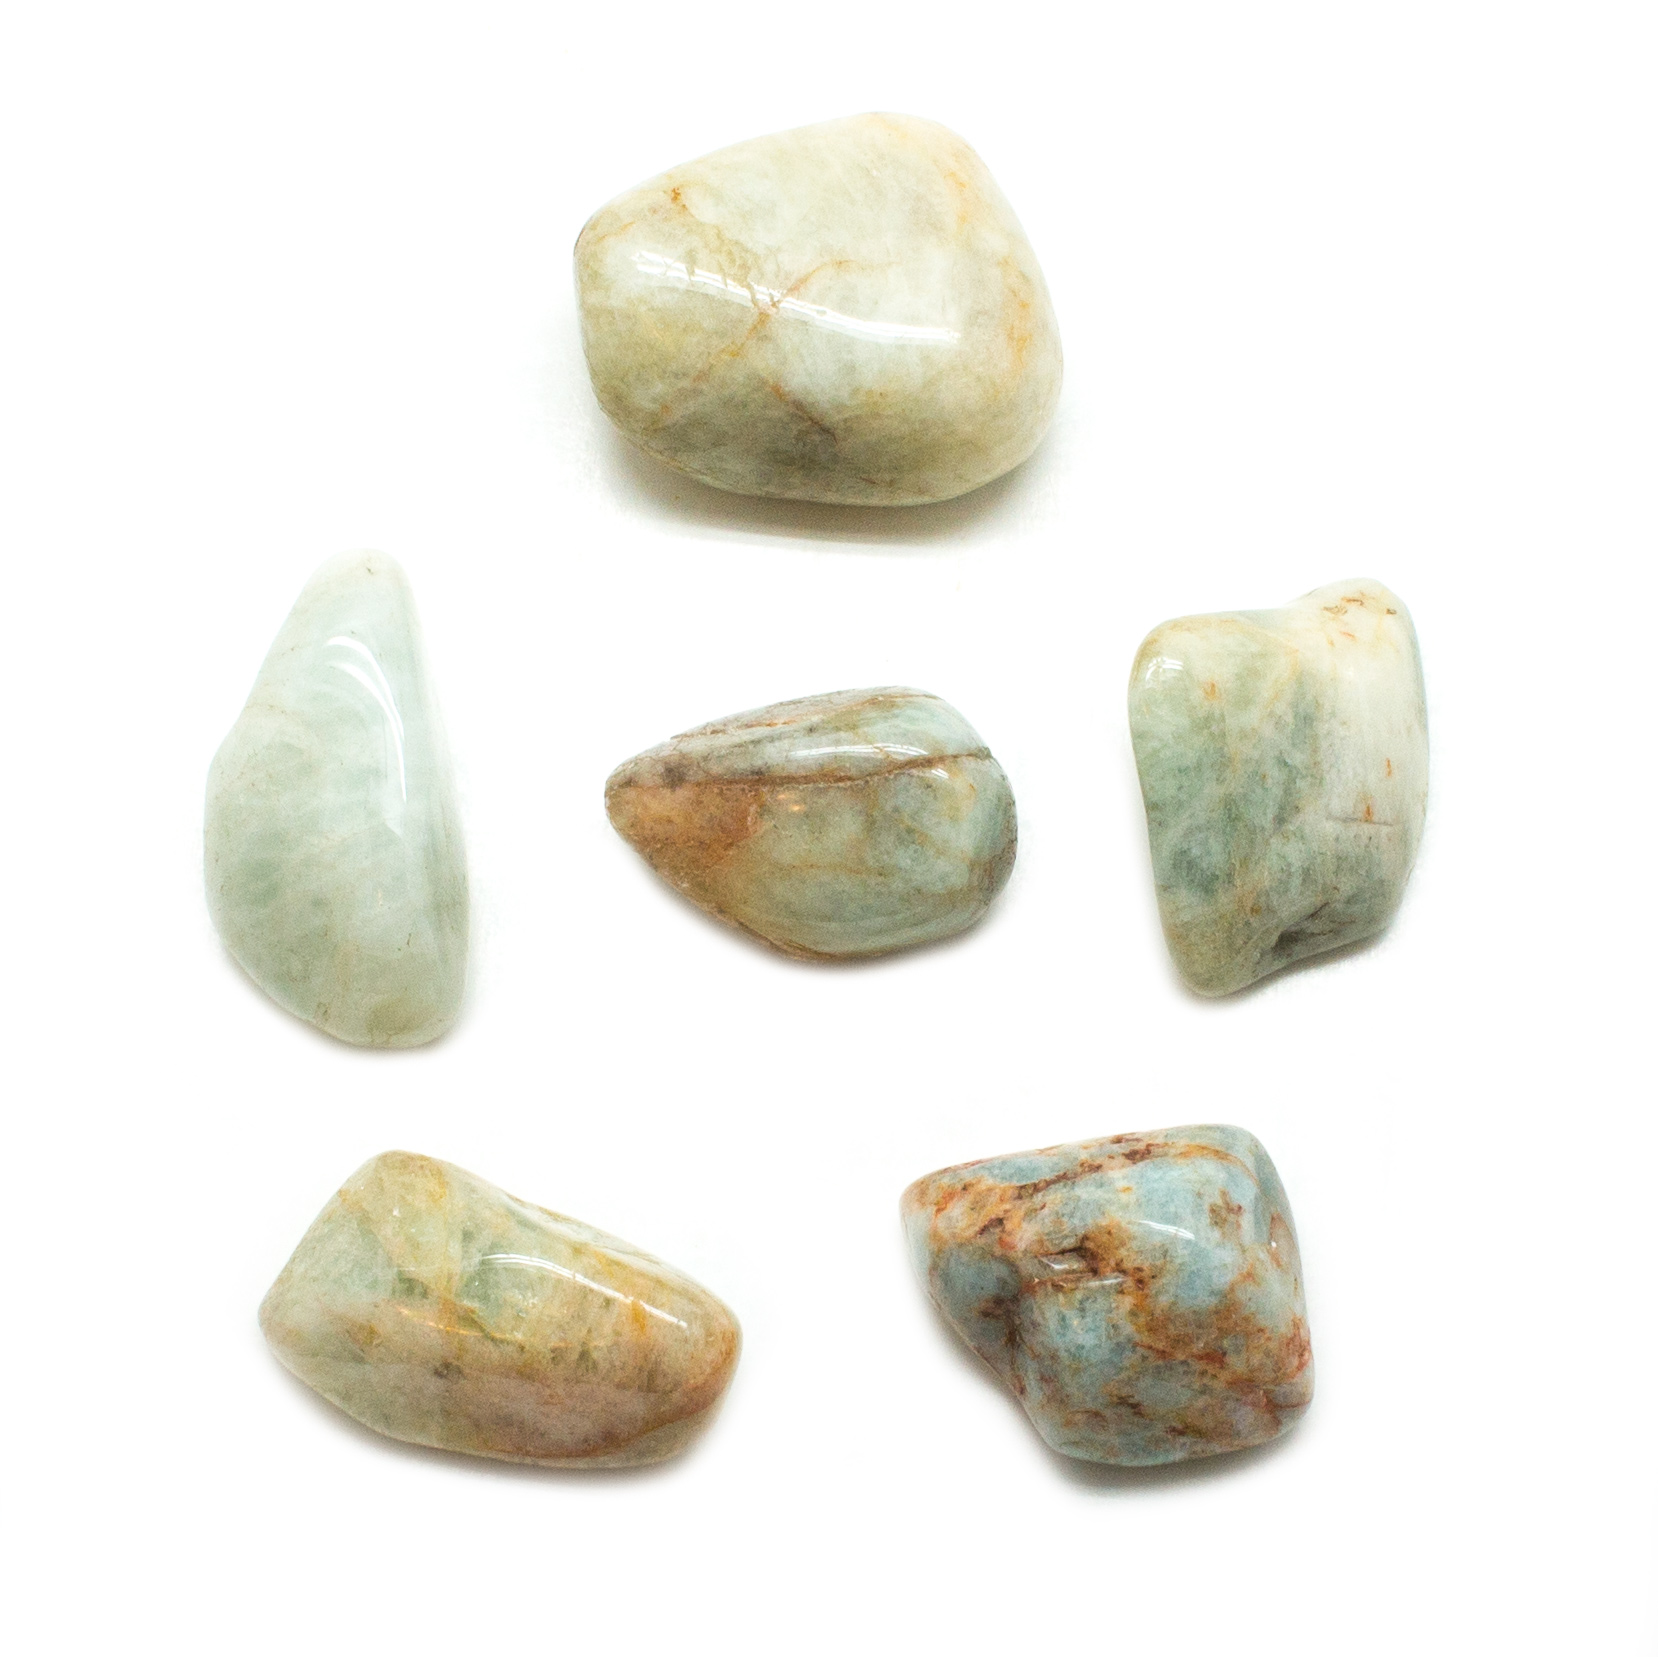 Polished Aquamarine Tumbled Stone Approx 12-23 for Wire Wrapping or Crystal Grid Supply BIN-0313